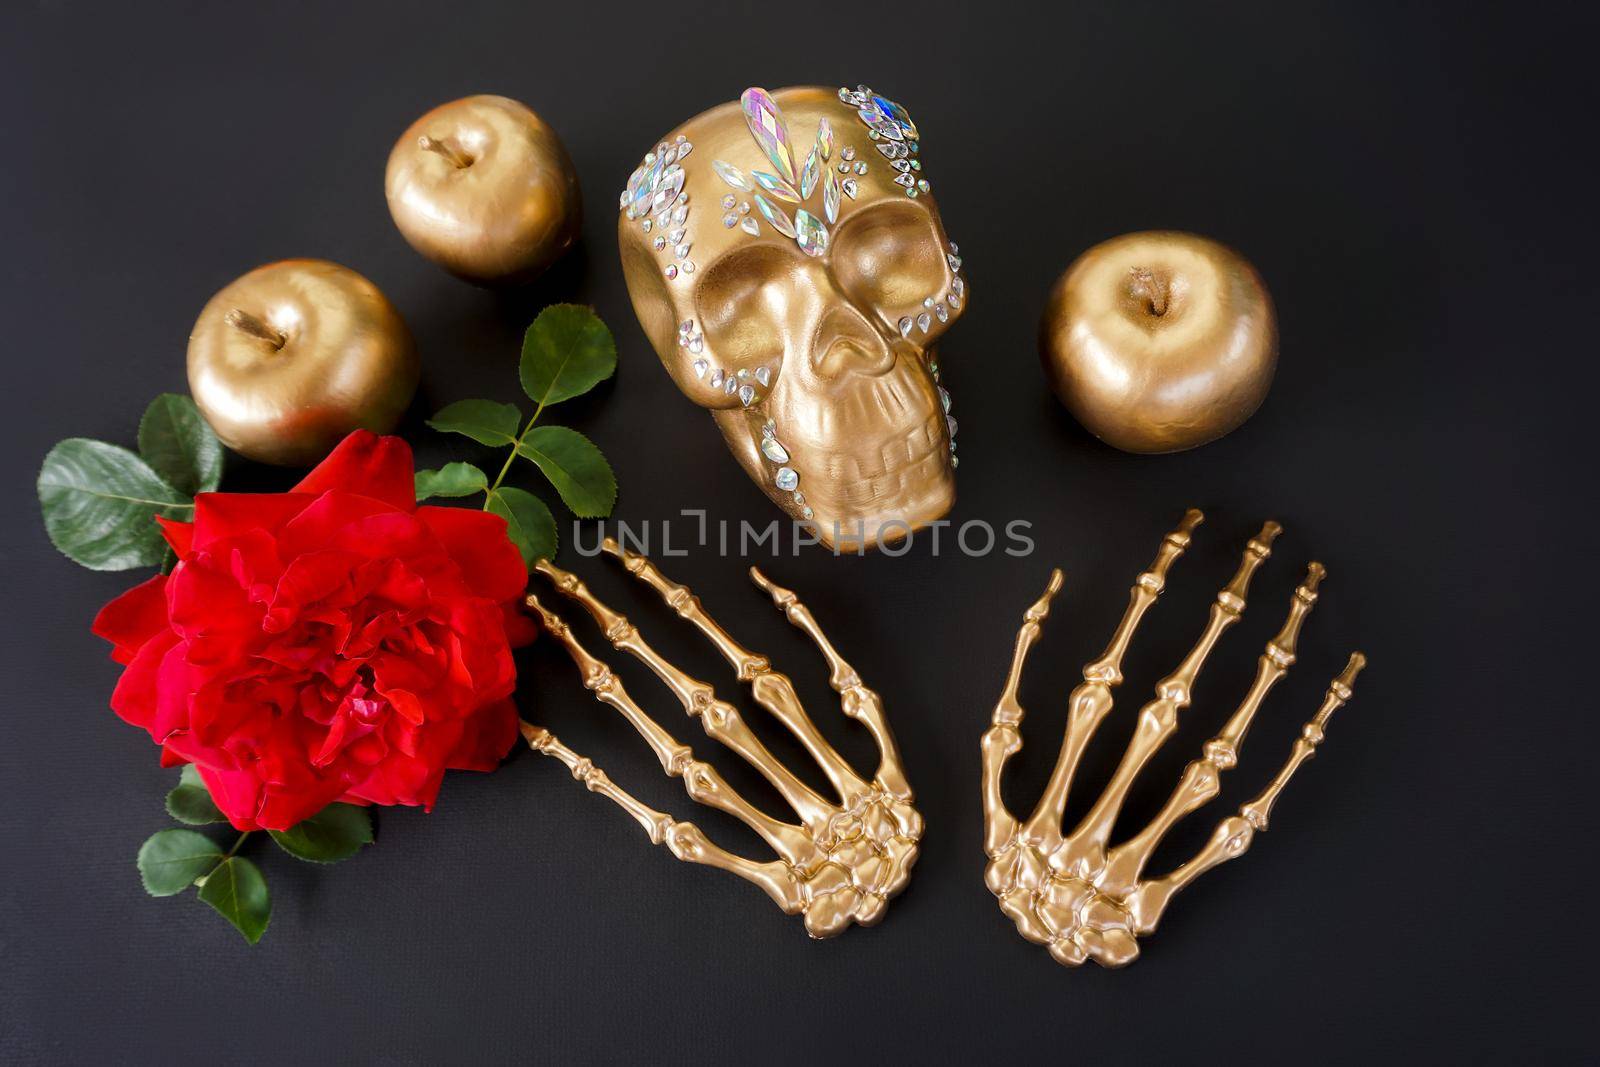 The golden skull is decorated with rhinestones, the paws of a skeleton, a red rose and treats made of apples lie next to it